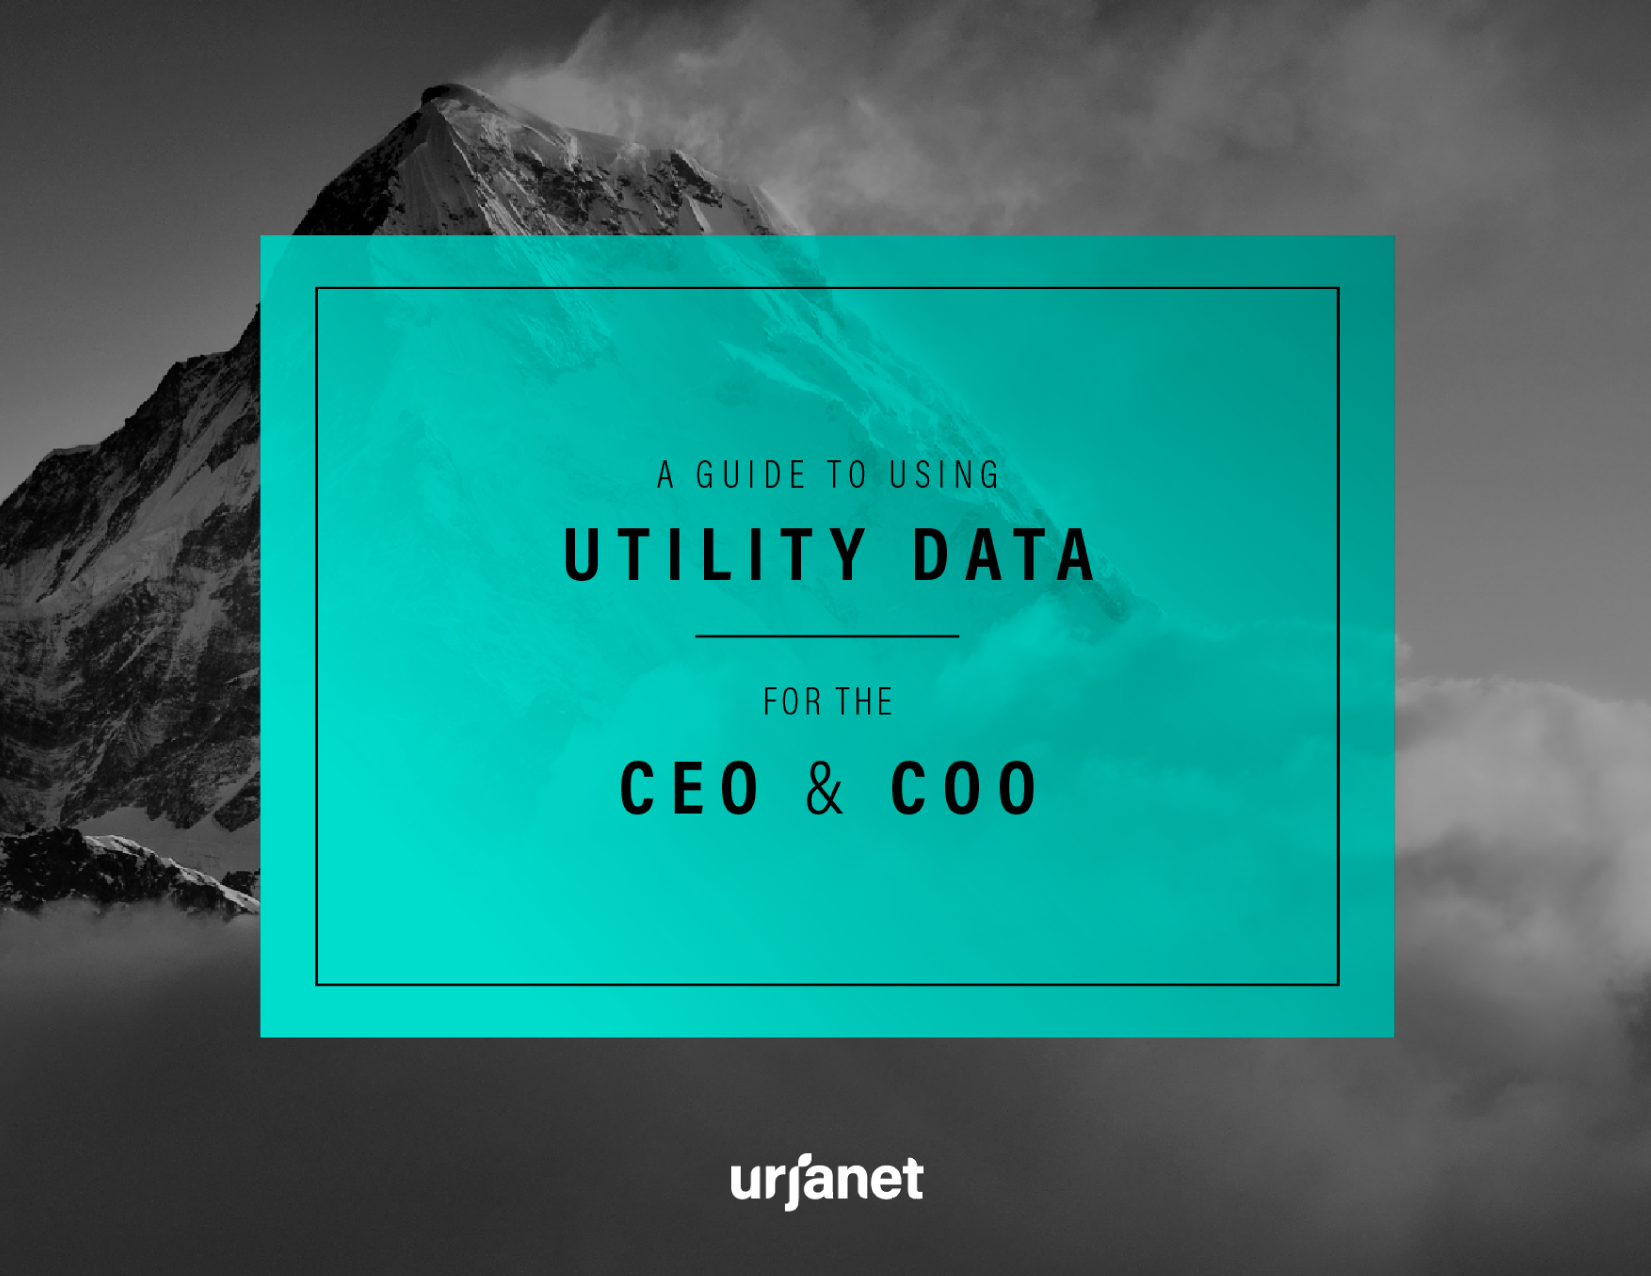 A Guide to Using Utility Data for the CEO & COO